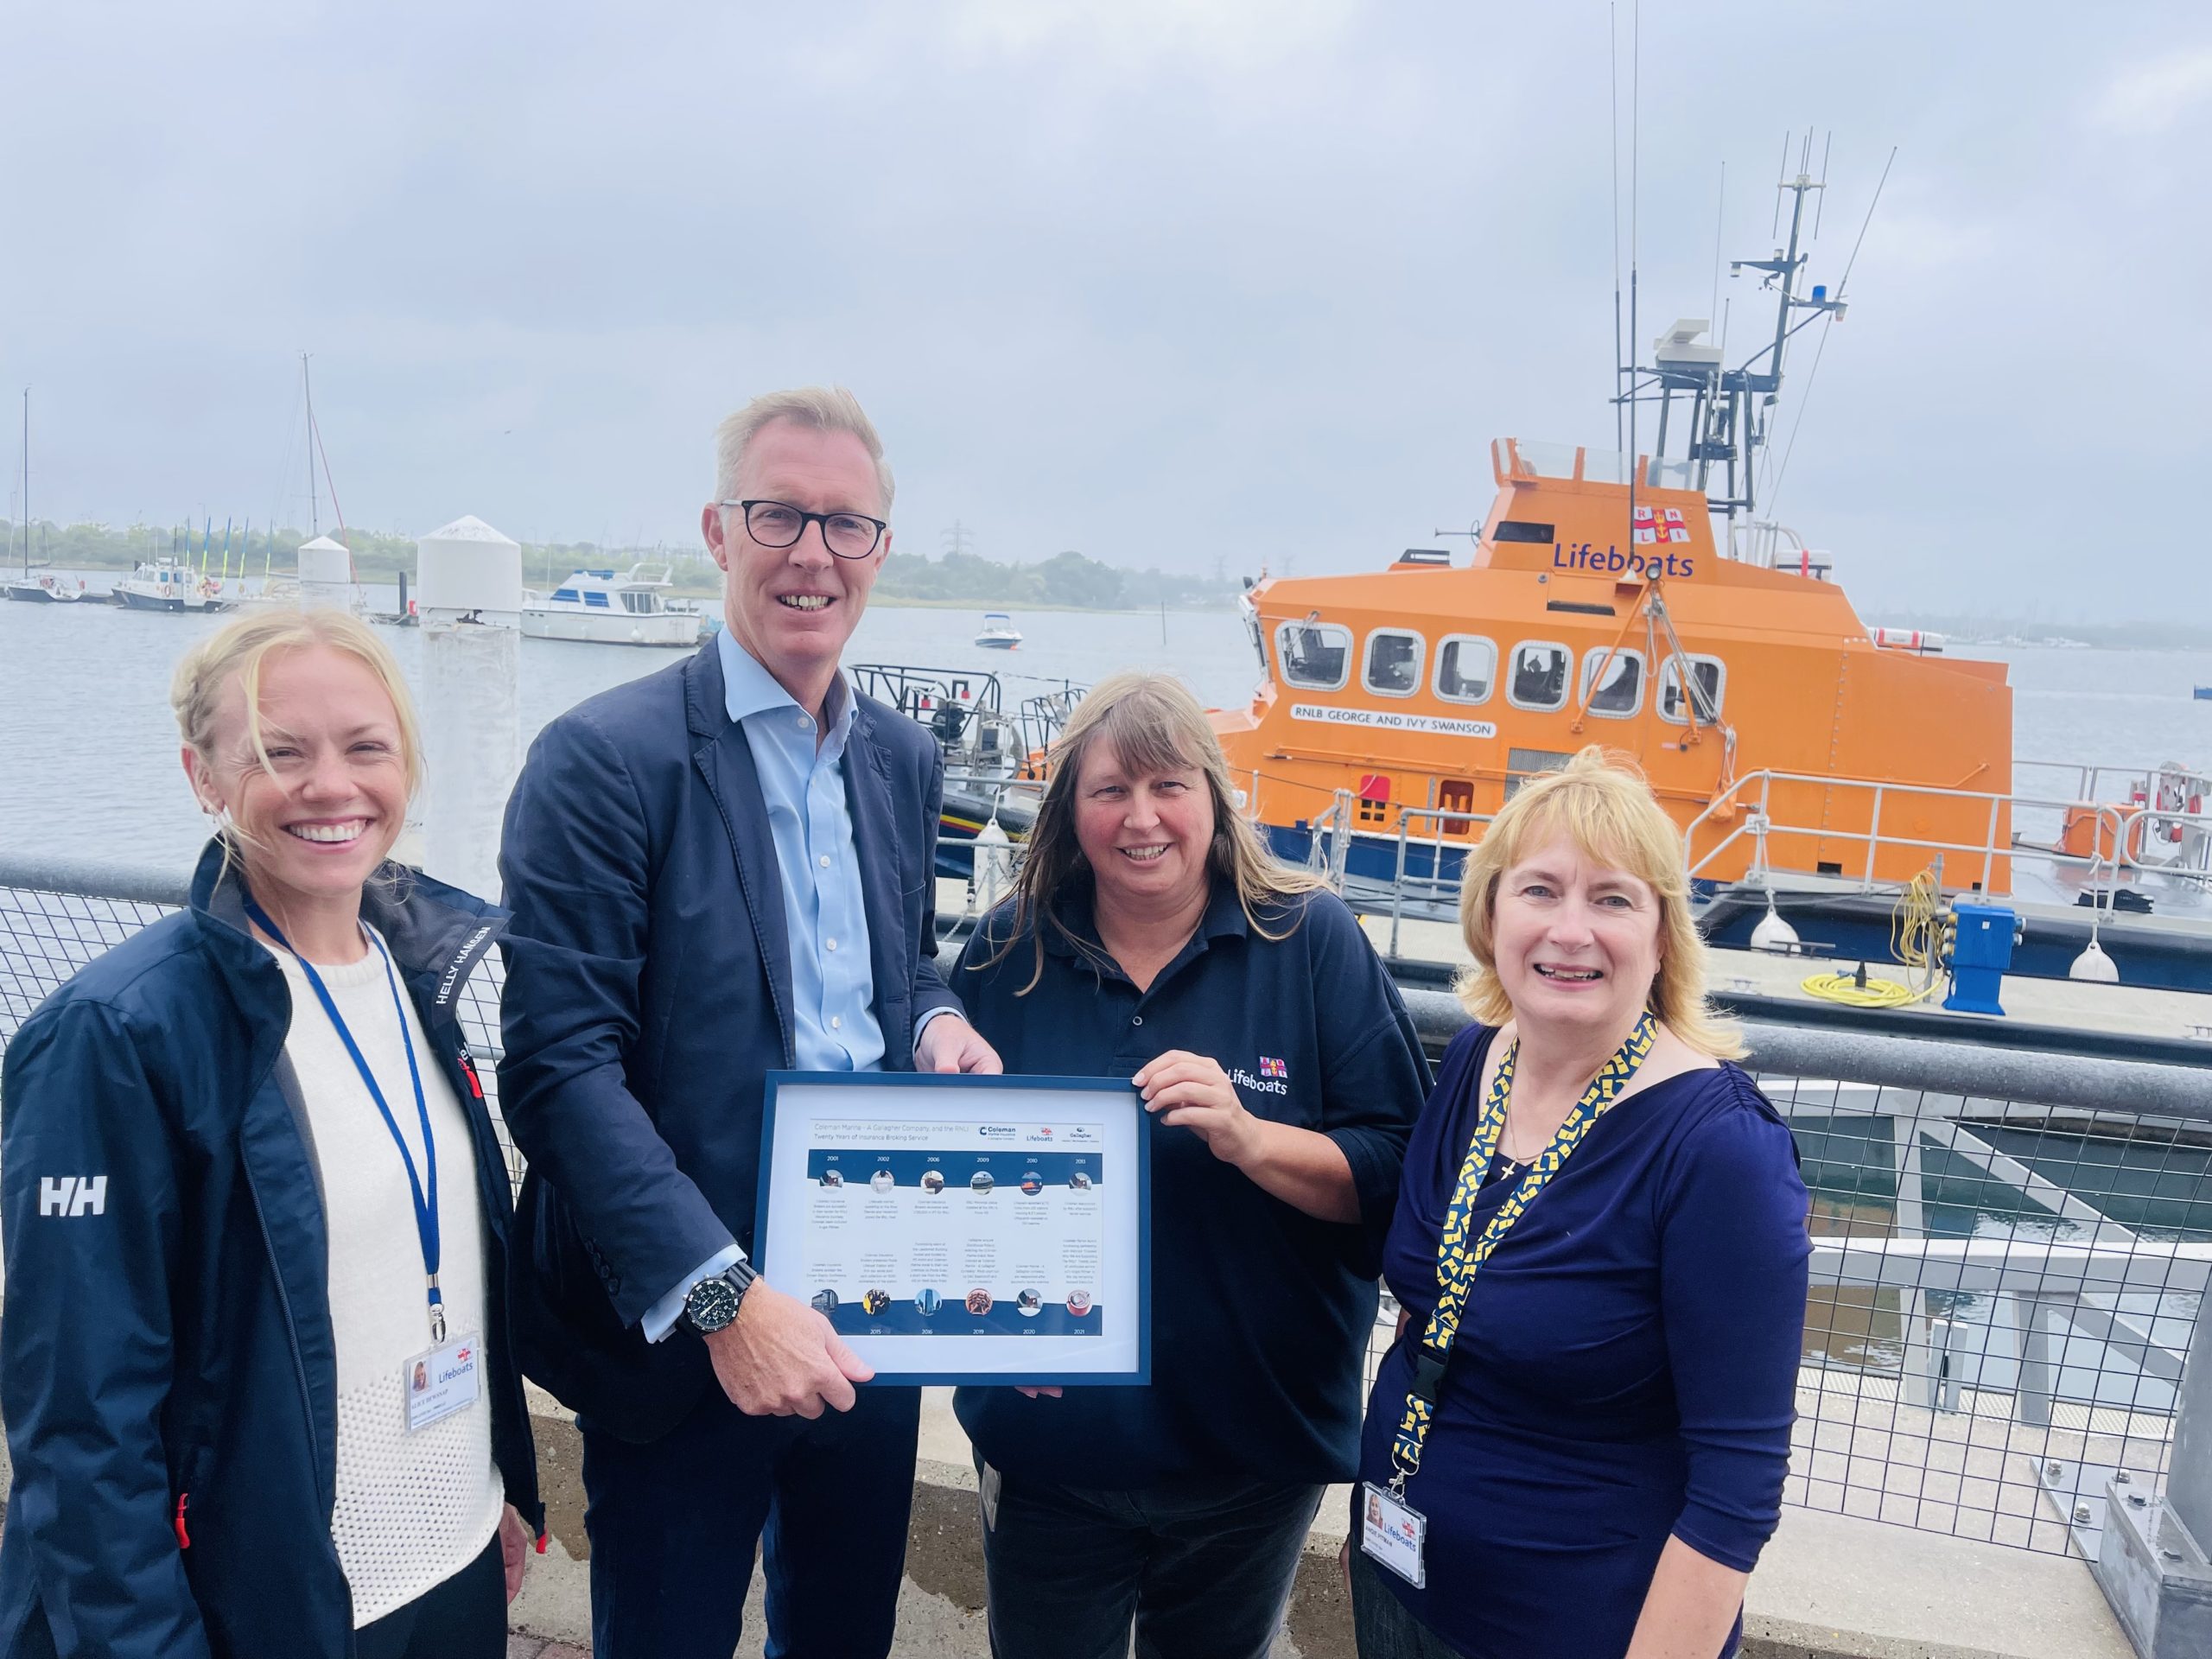 20 year relationship recognised between insurance broker Gallagher’s marine team and RNLI